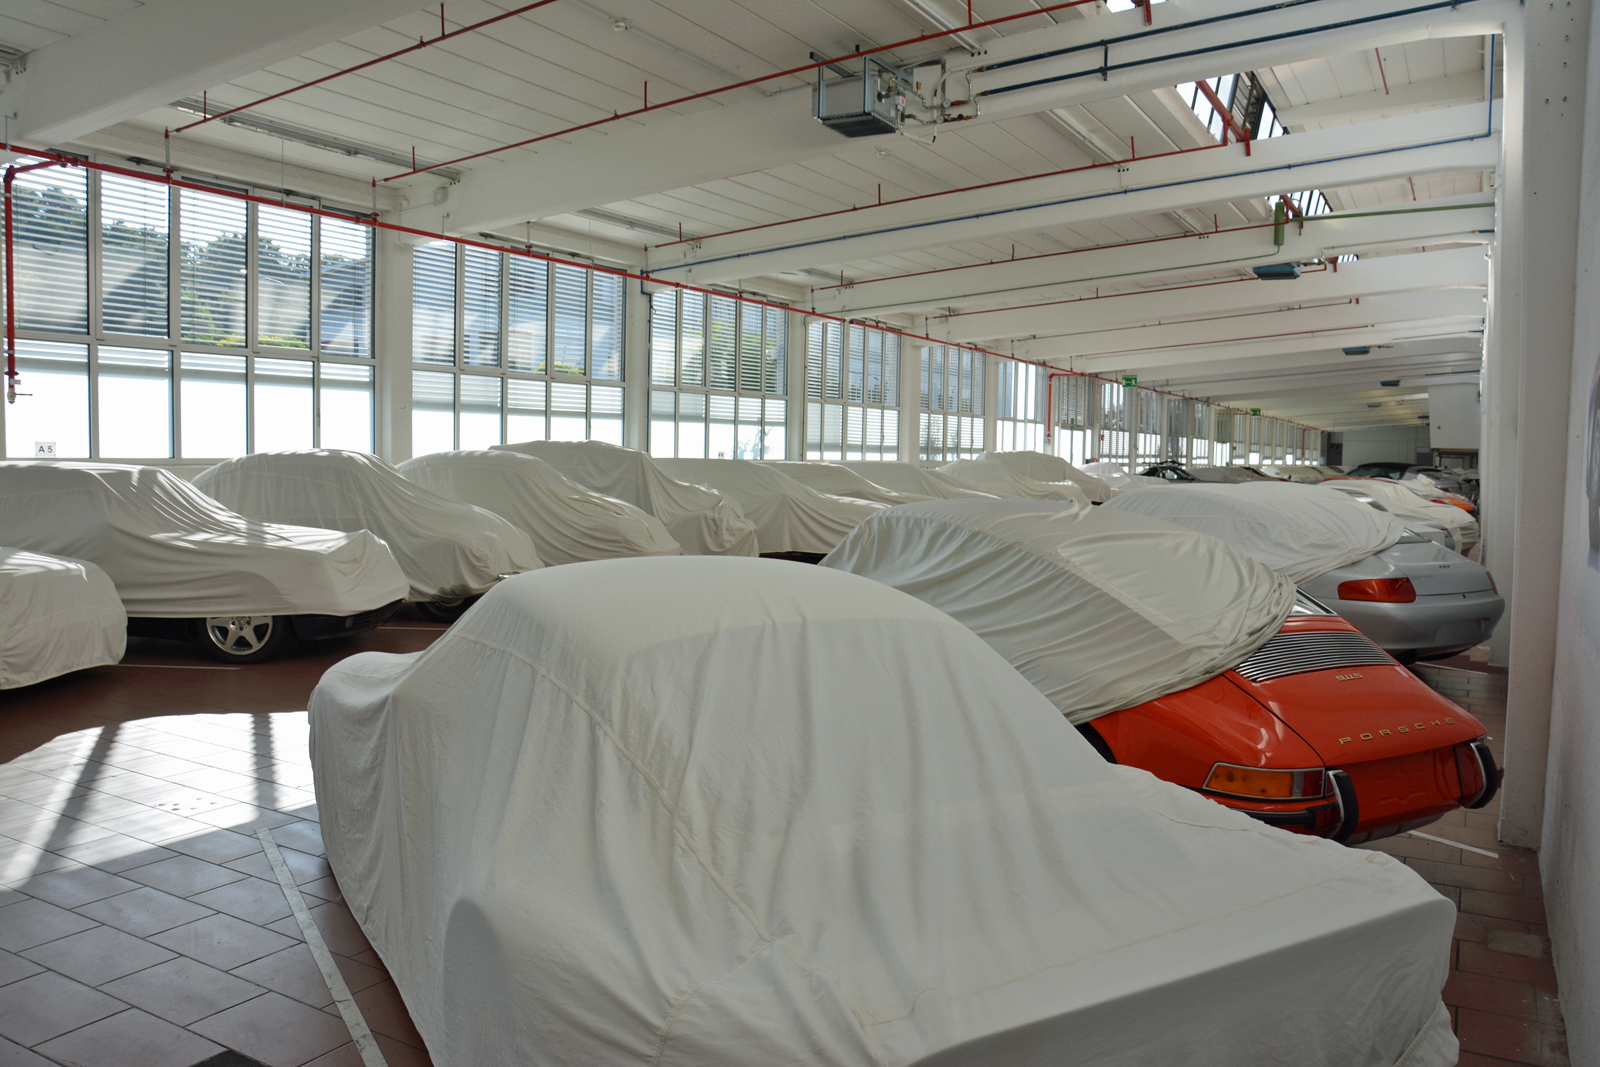 <p>Covers protect cars from prolonged exposure to direct sunlight, dust, and prying eyes. While some of the sheets exceptionally came off during our visit, Klein informed us a handful of cars would <strong>remain hidden</strong> regardless of how nicely we asked. Some of the prototypes stored in the facility have never been shown to the public before.</p>